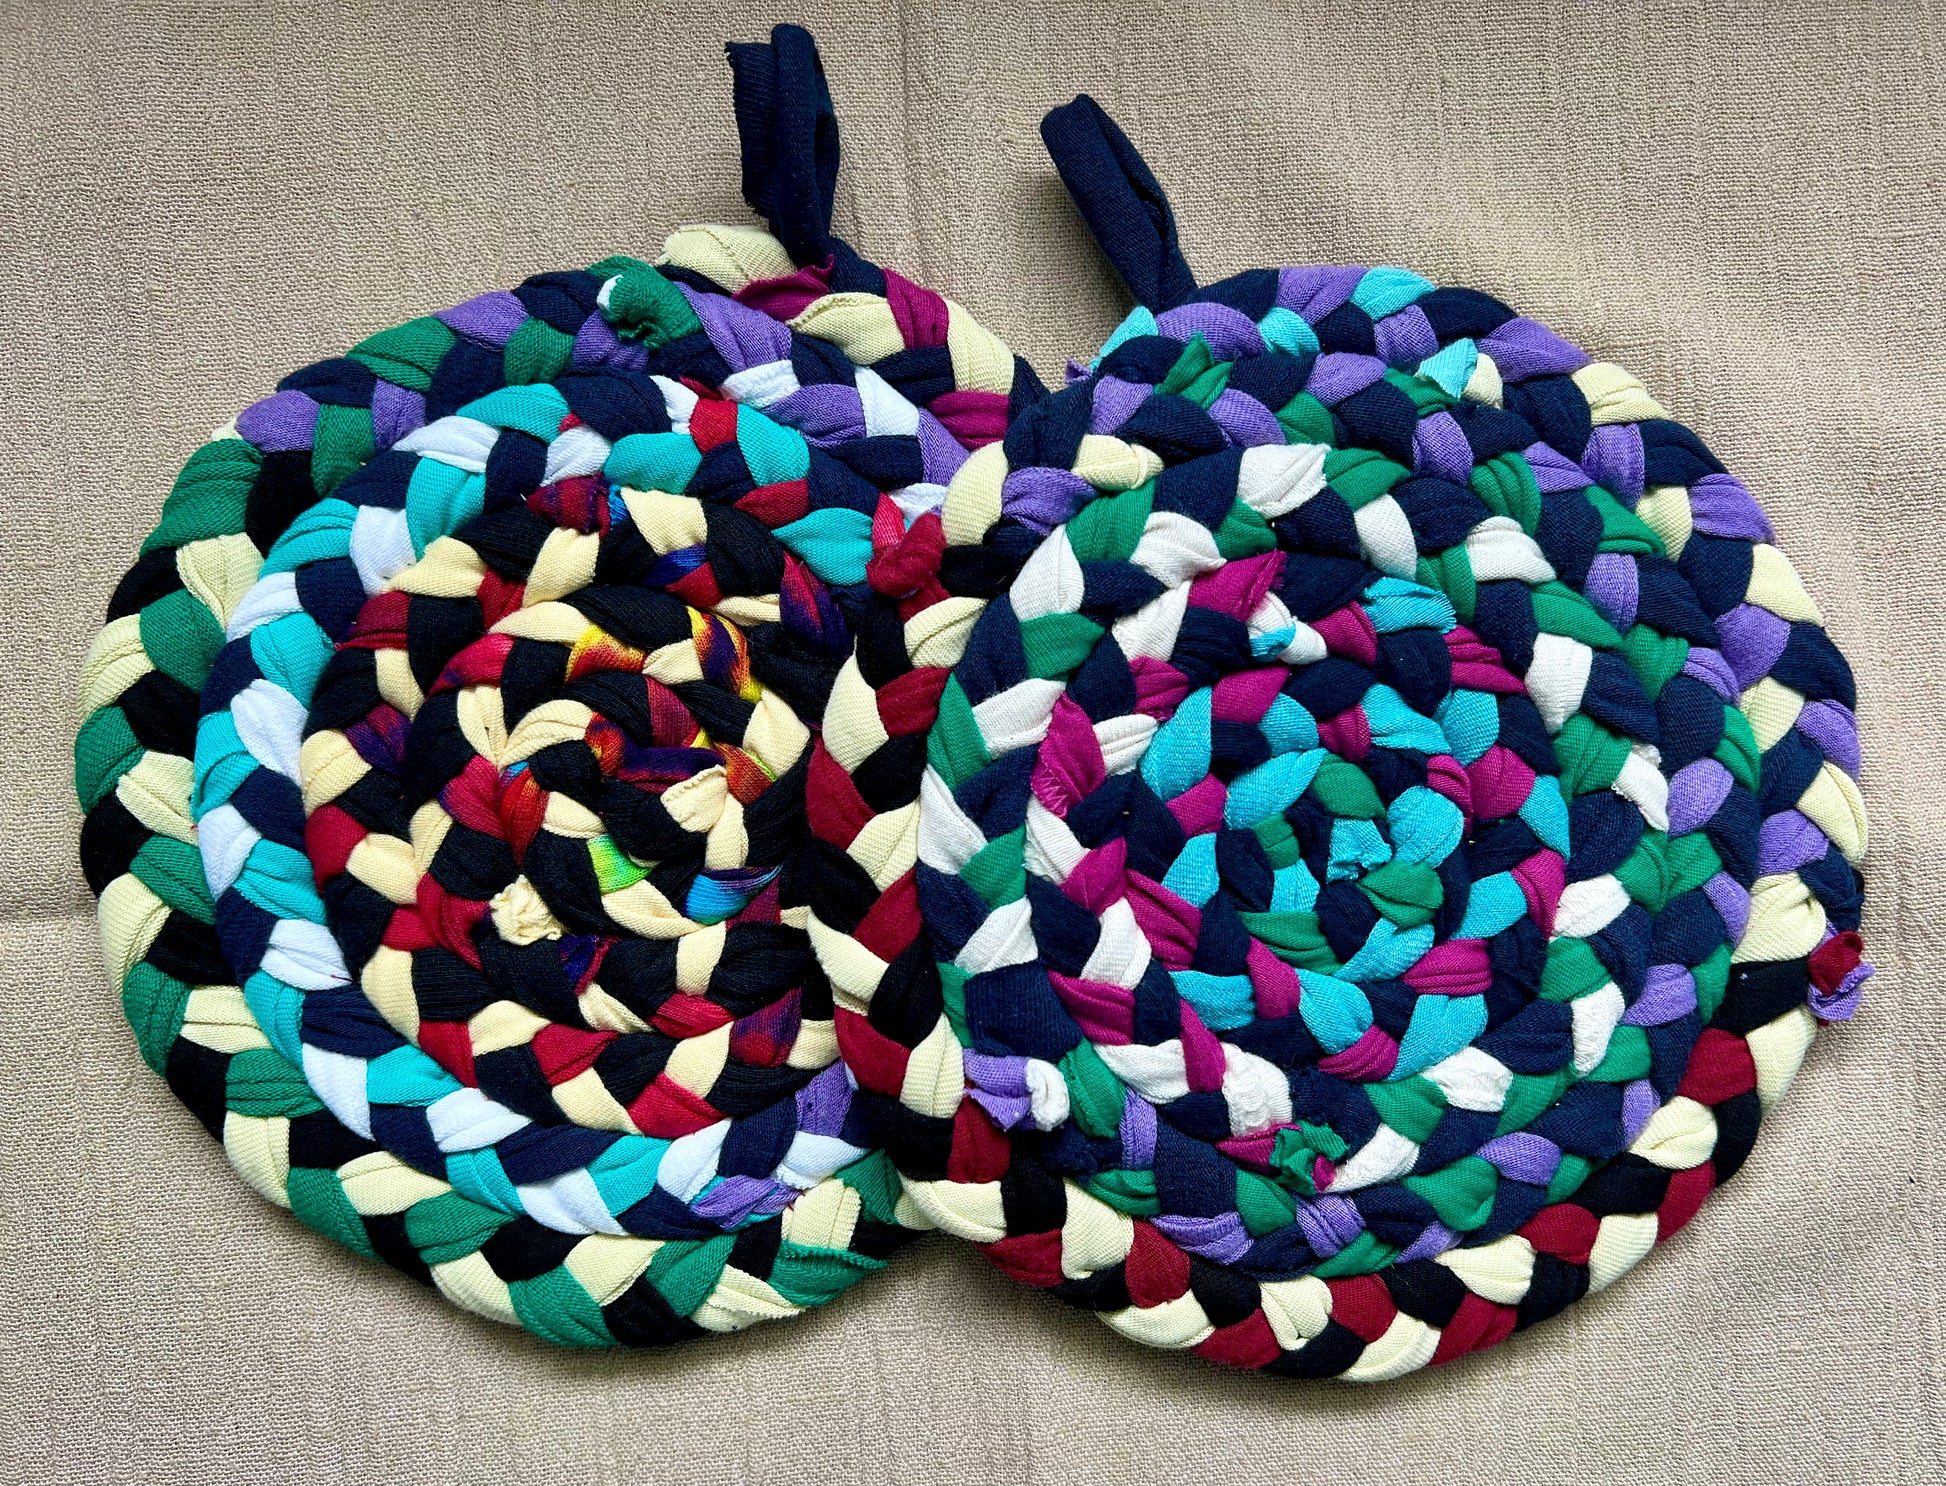 A set of two trivet potholders, side by side, lay flat on a linen surface.